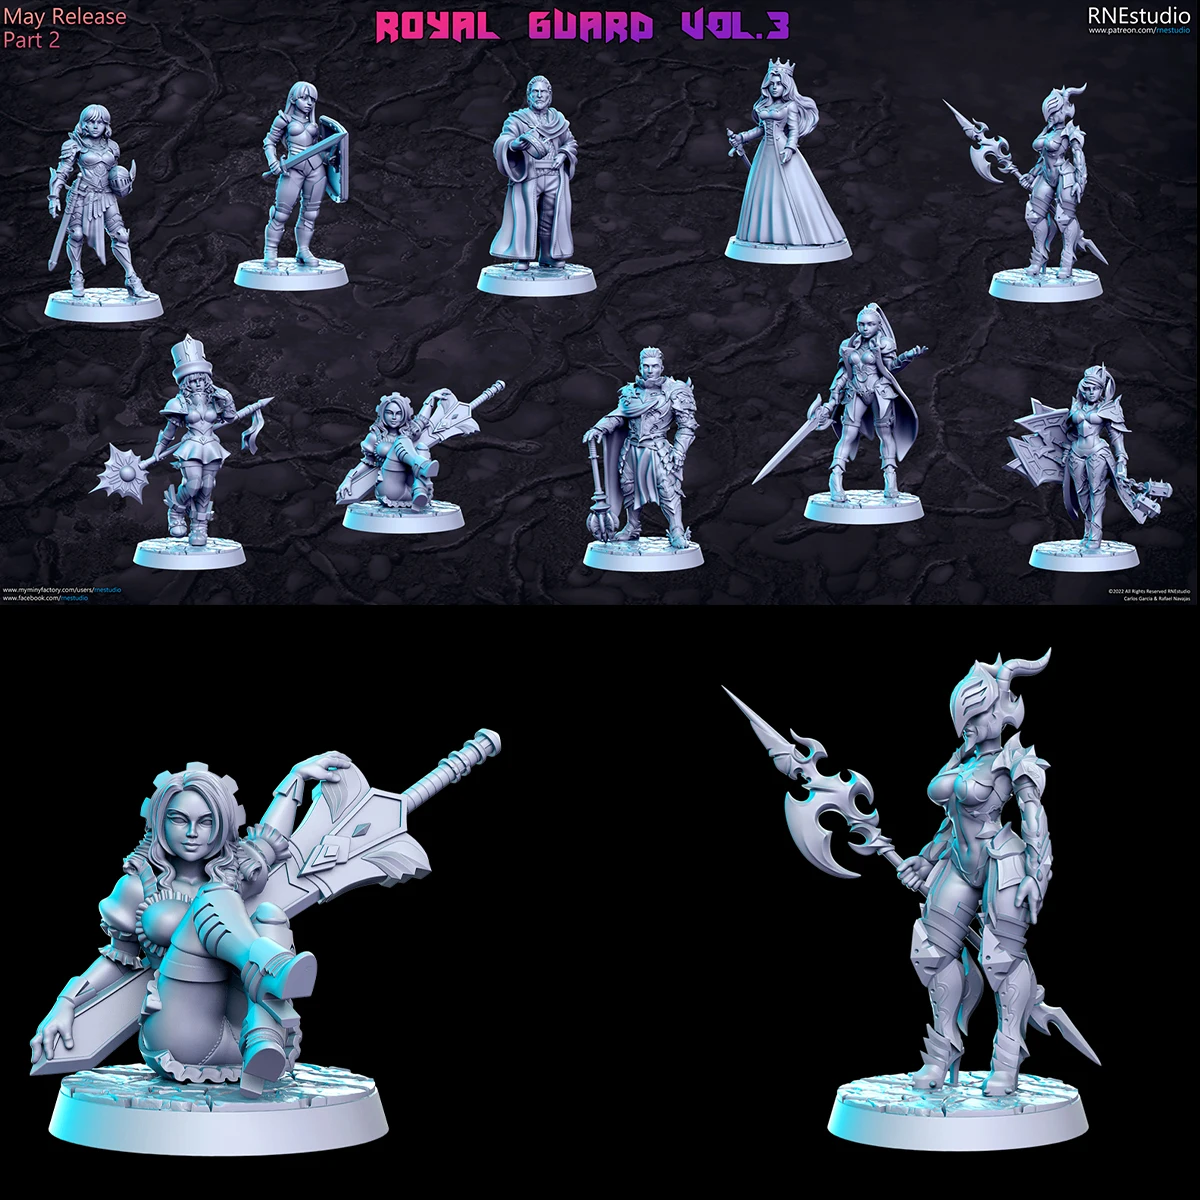 

Ancient Knight Human Character Dragon and Dungeon dnd Running Group Board Game Chess Model in the Kingdom Guard